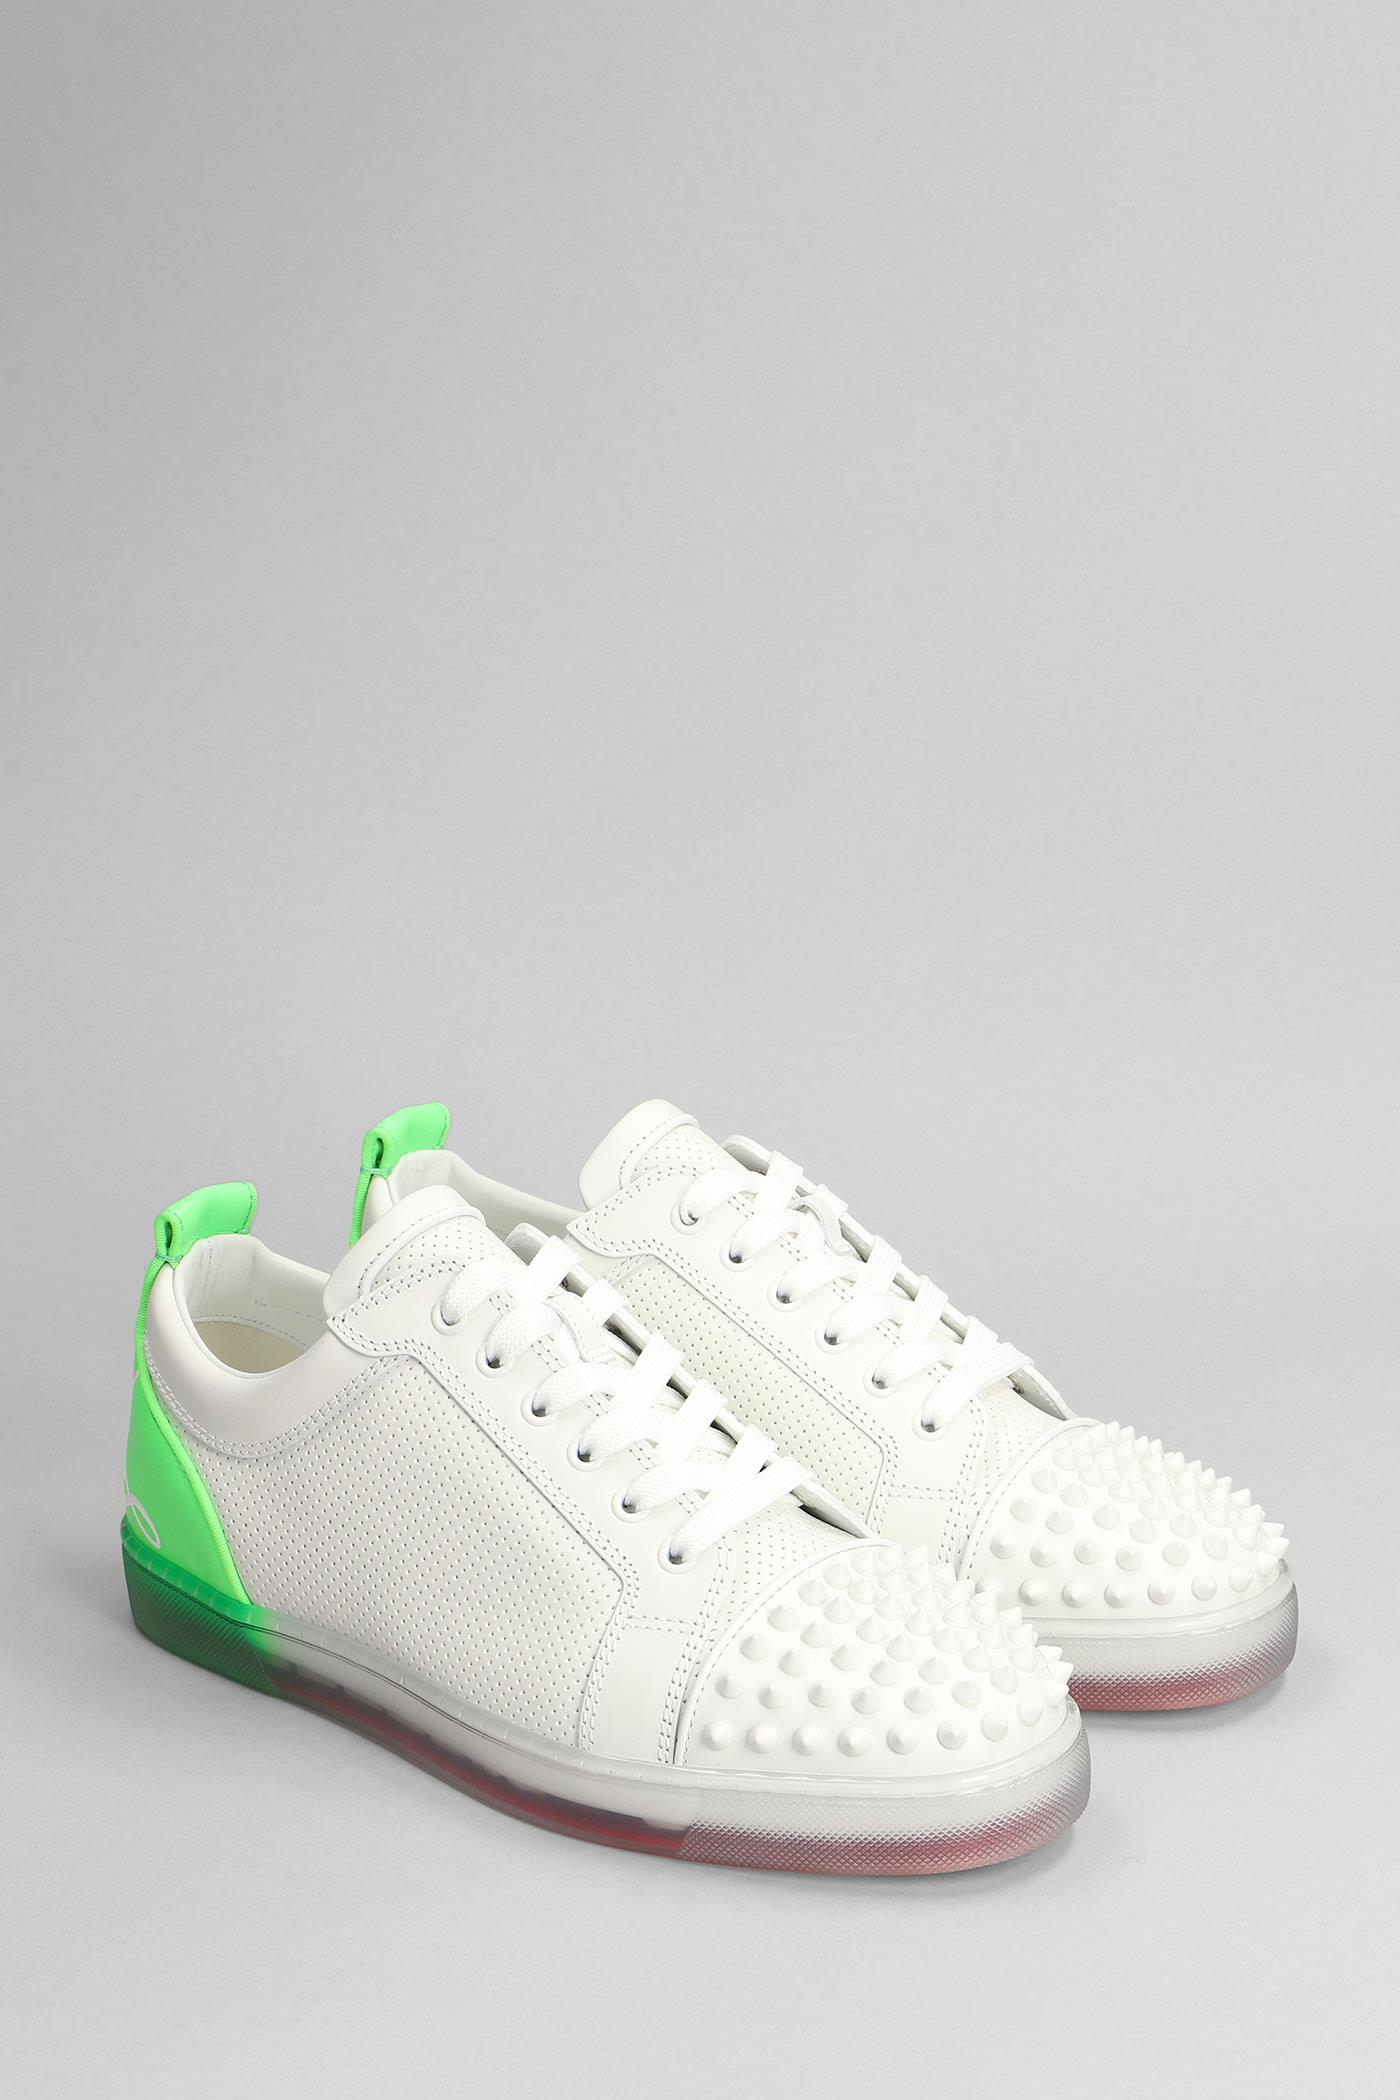 Christian Louboutin Fun Louis Junior White And Green Leather Sneakers New